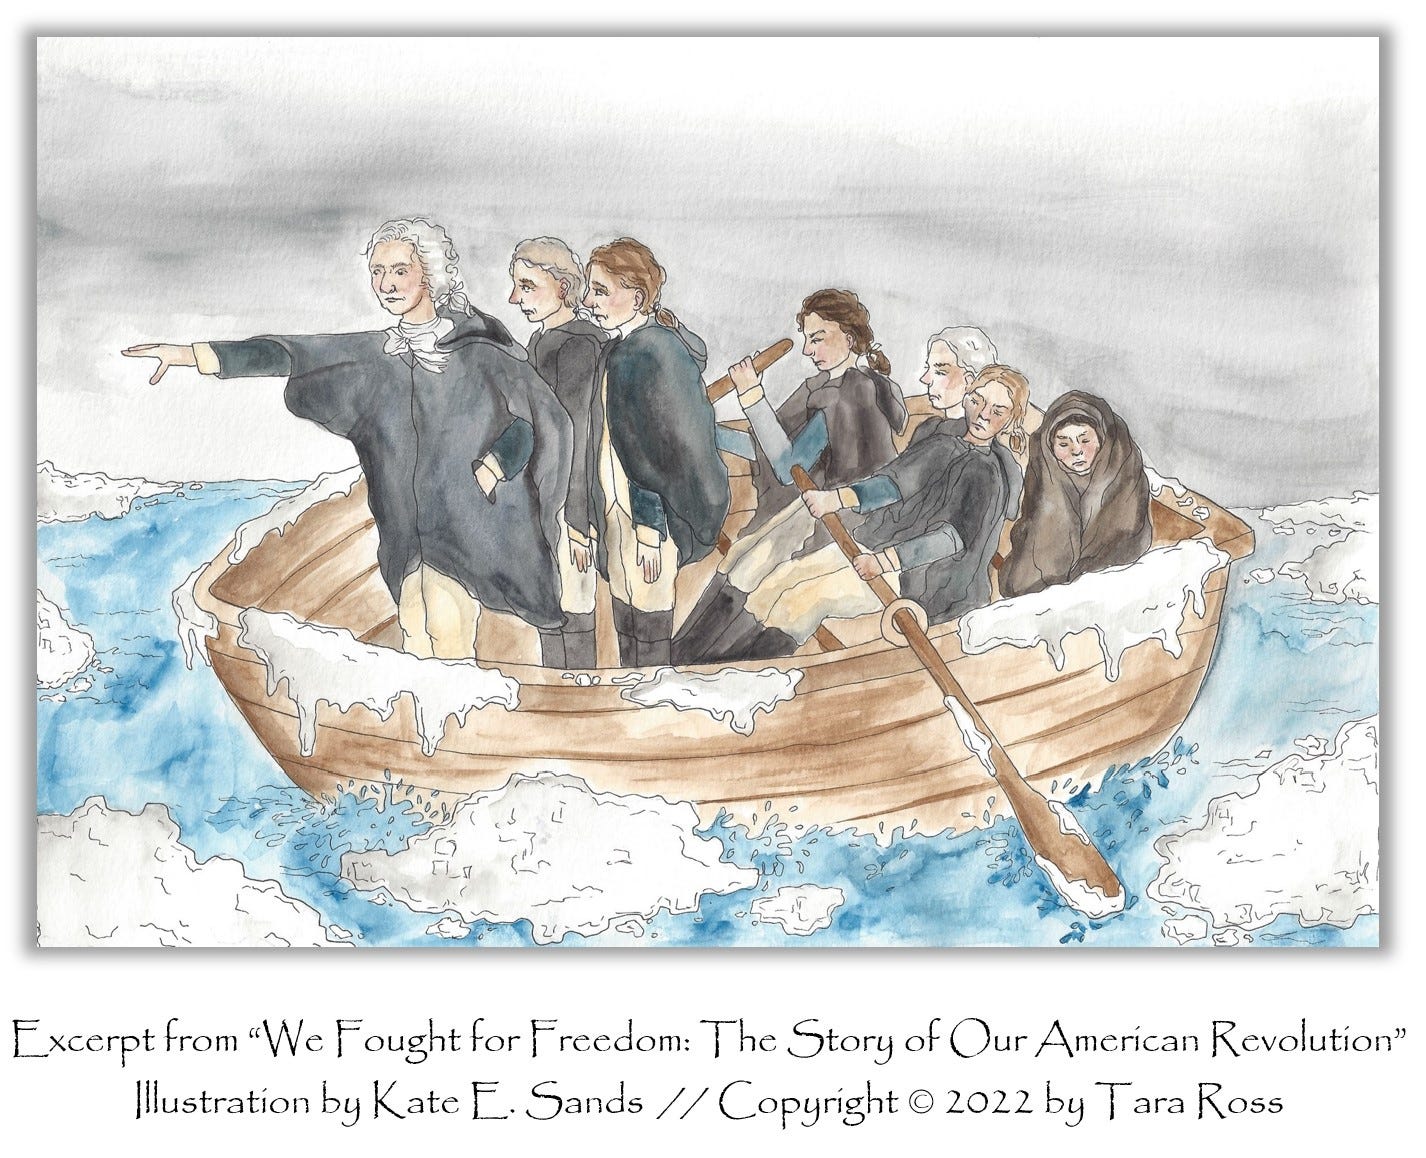 Excerpt from "We Fought for Freedom: The Story of Our American Revolution" Illustration by Kate E. Sands // Copyright © 2022 by Tara Ross.  The illustration shows George Washington and his men crossing an icy Delaware River.